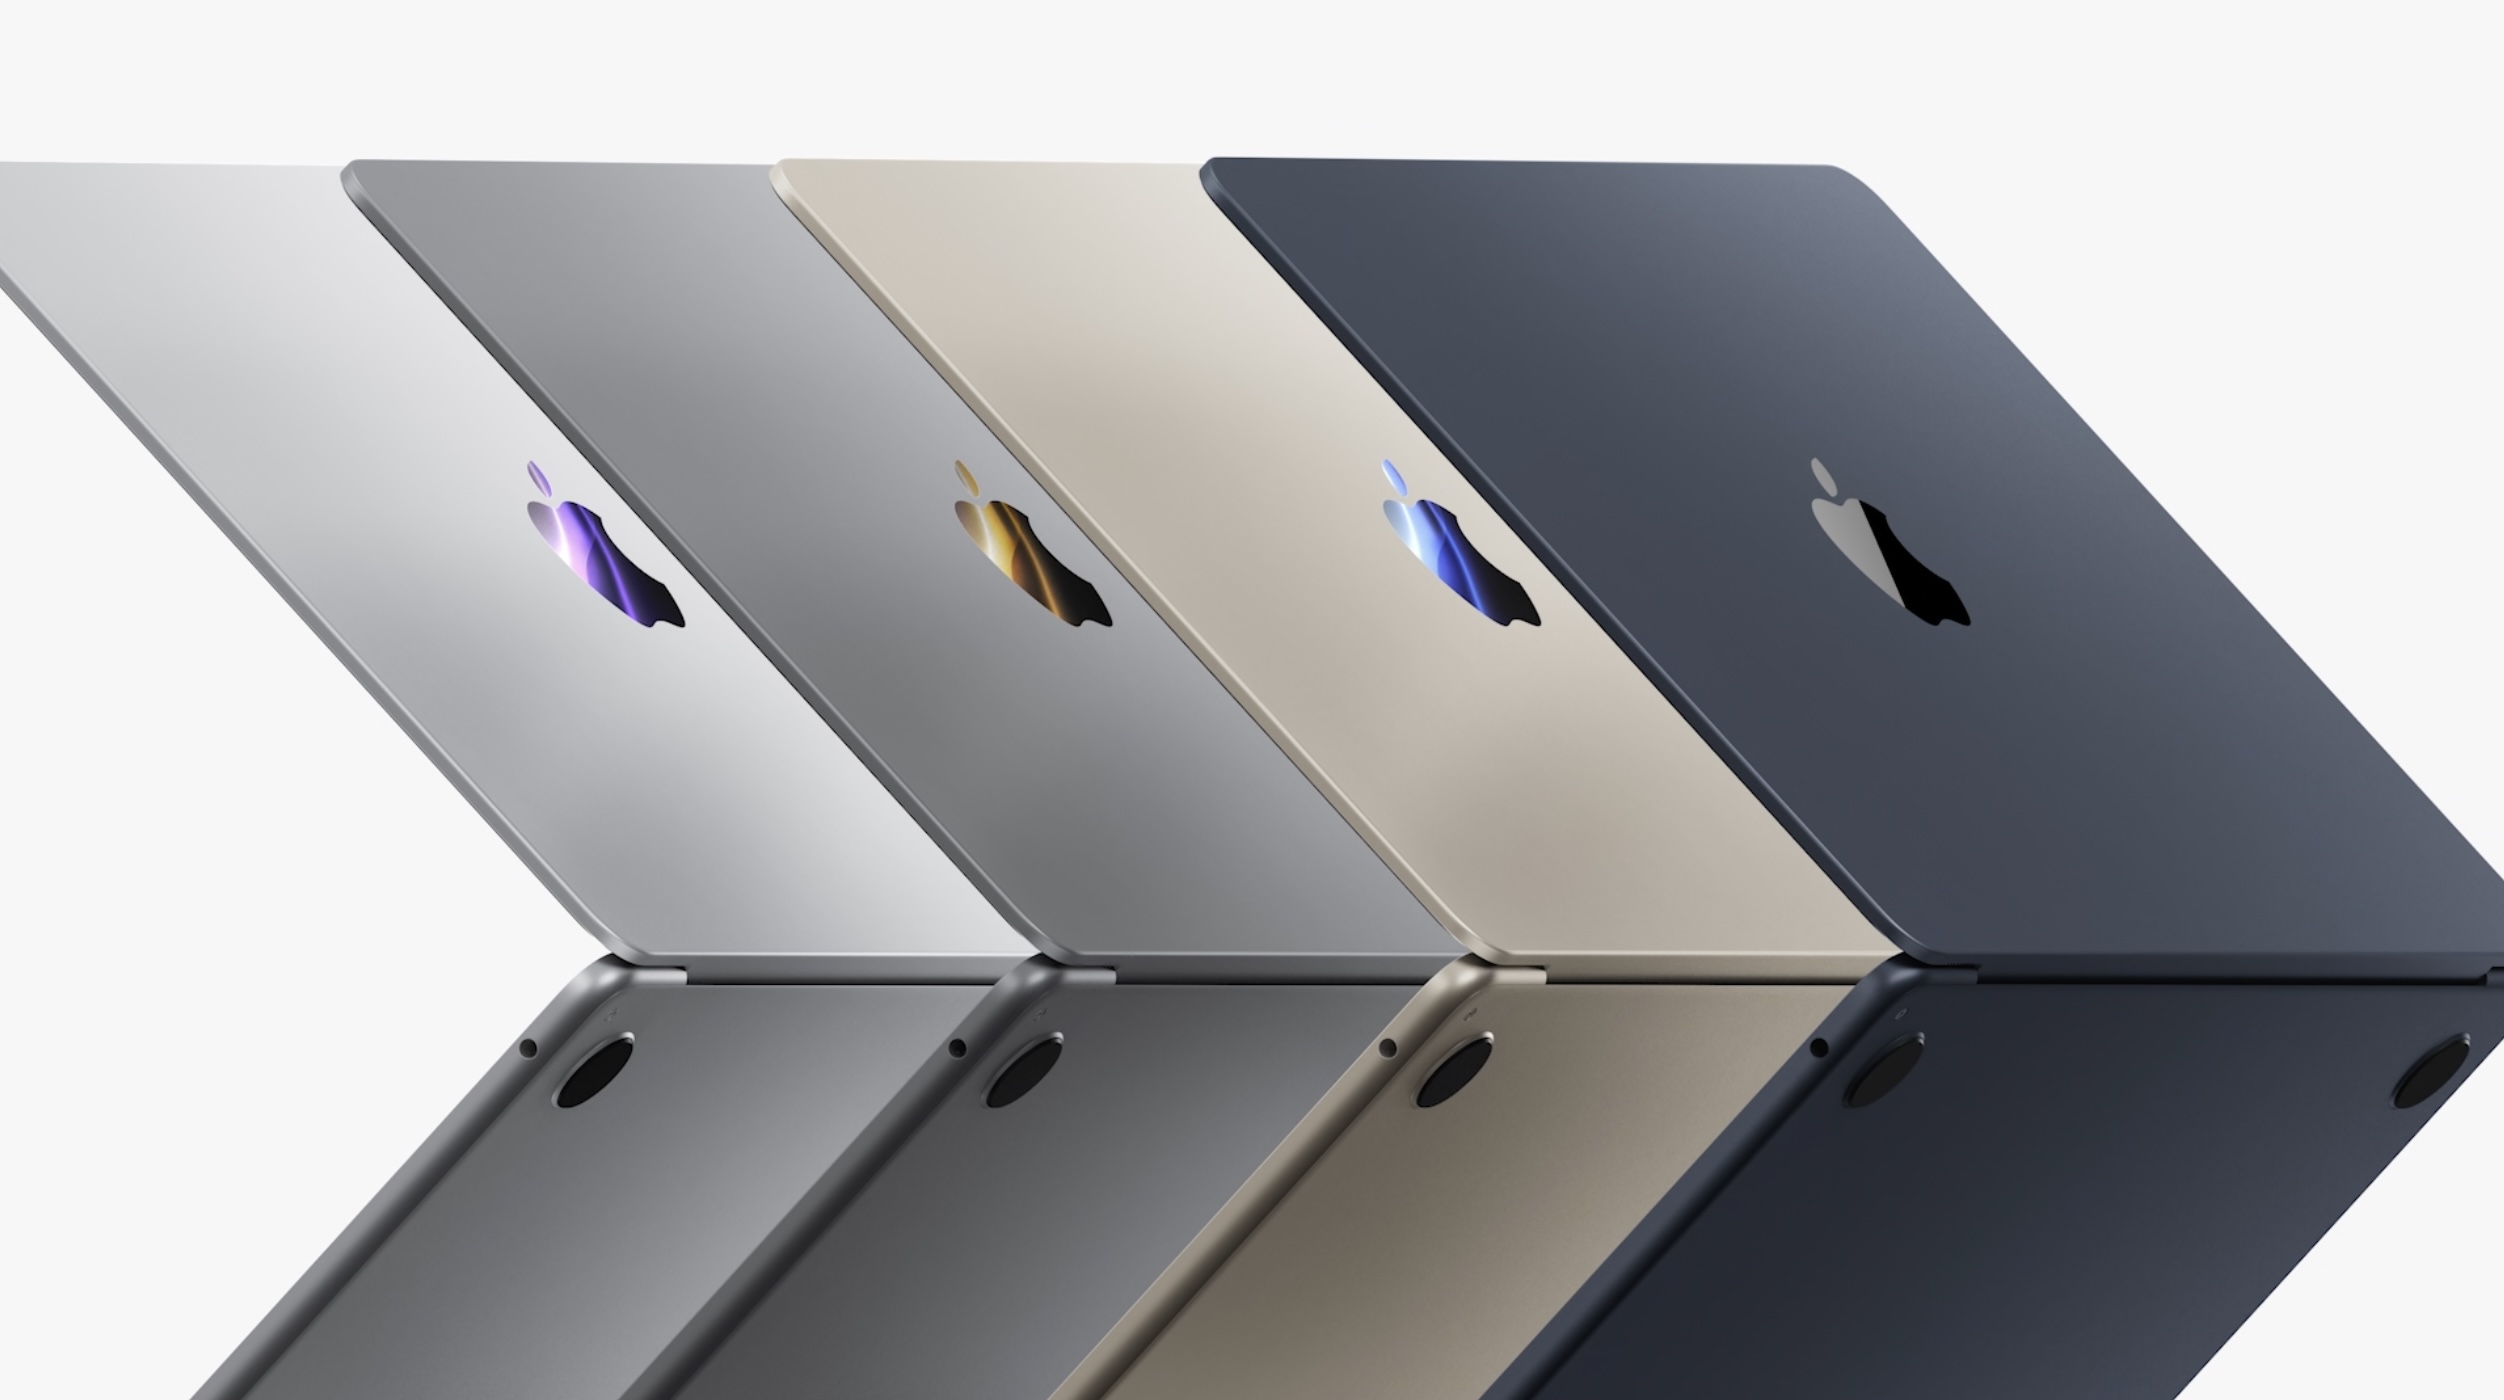 M2 MacBook Air reportedly hitting stores July 15 with pre-orders a week earlier.